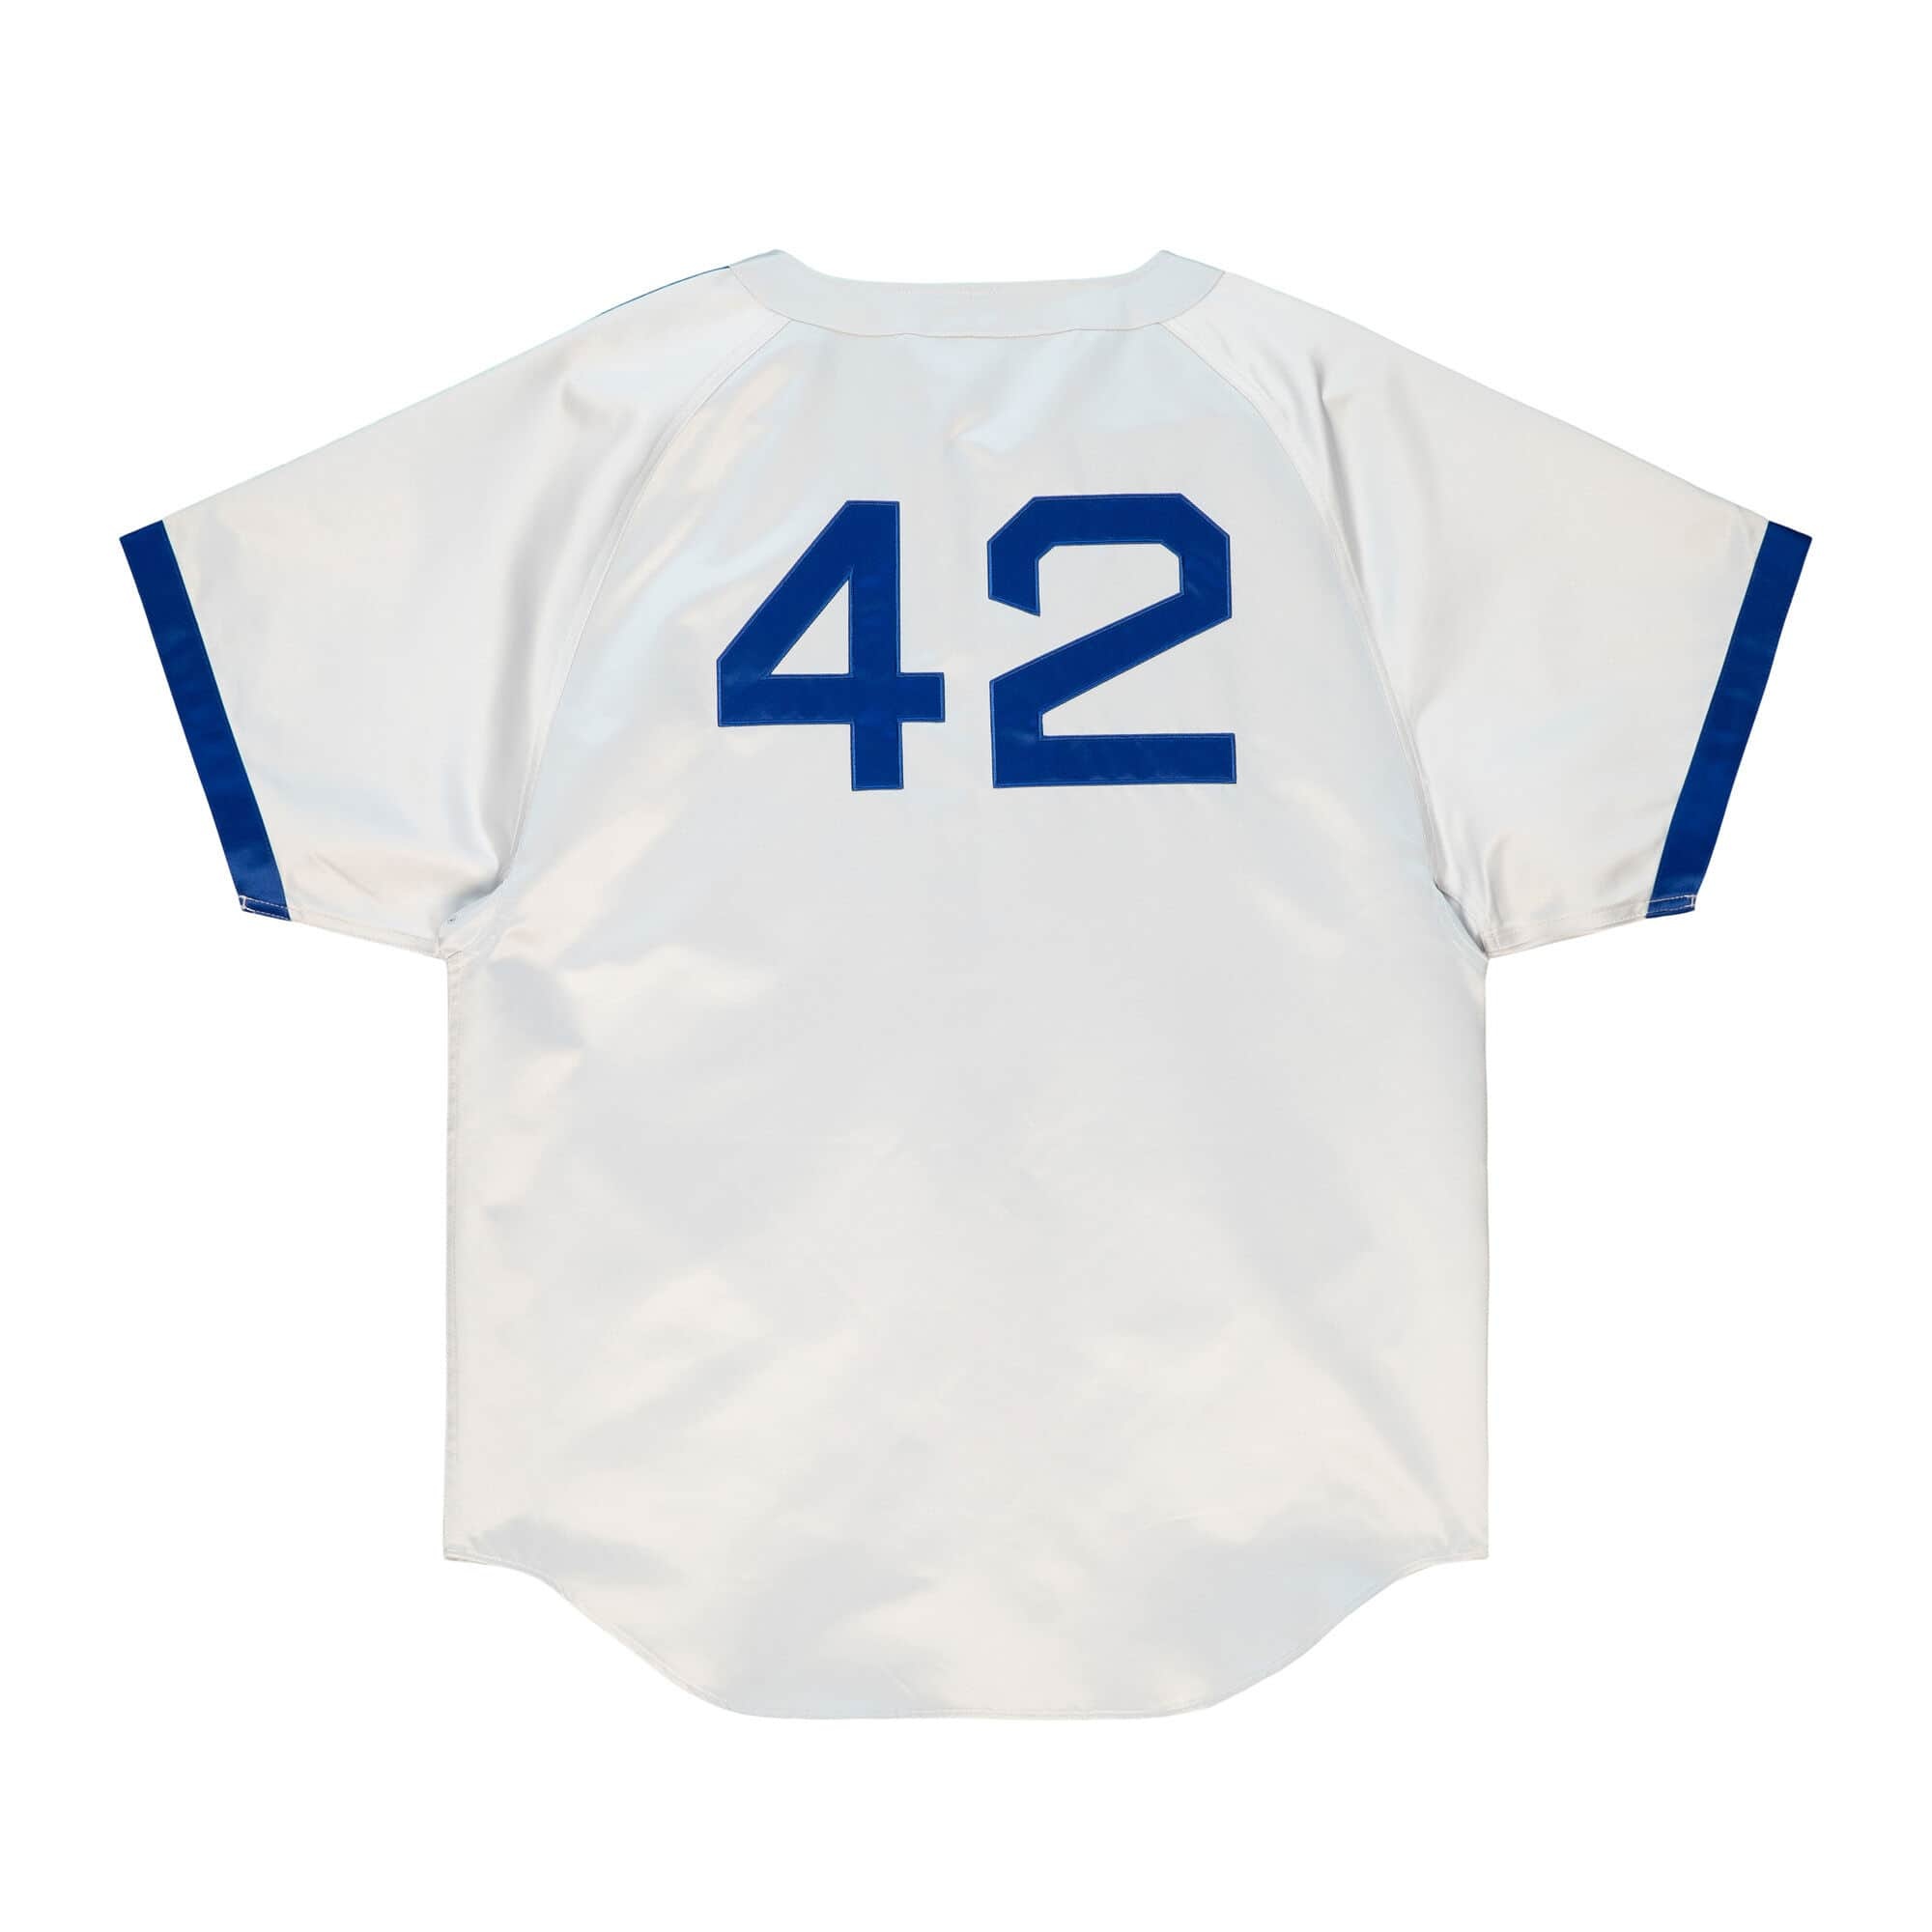 42 Jackie Robinson Authentic Dodgers Jerseys Available Now at www